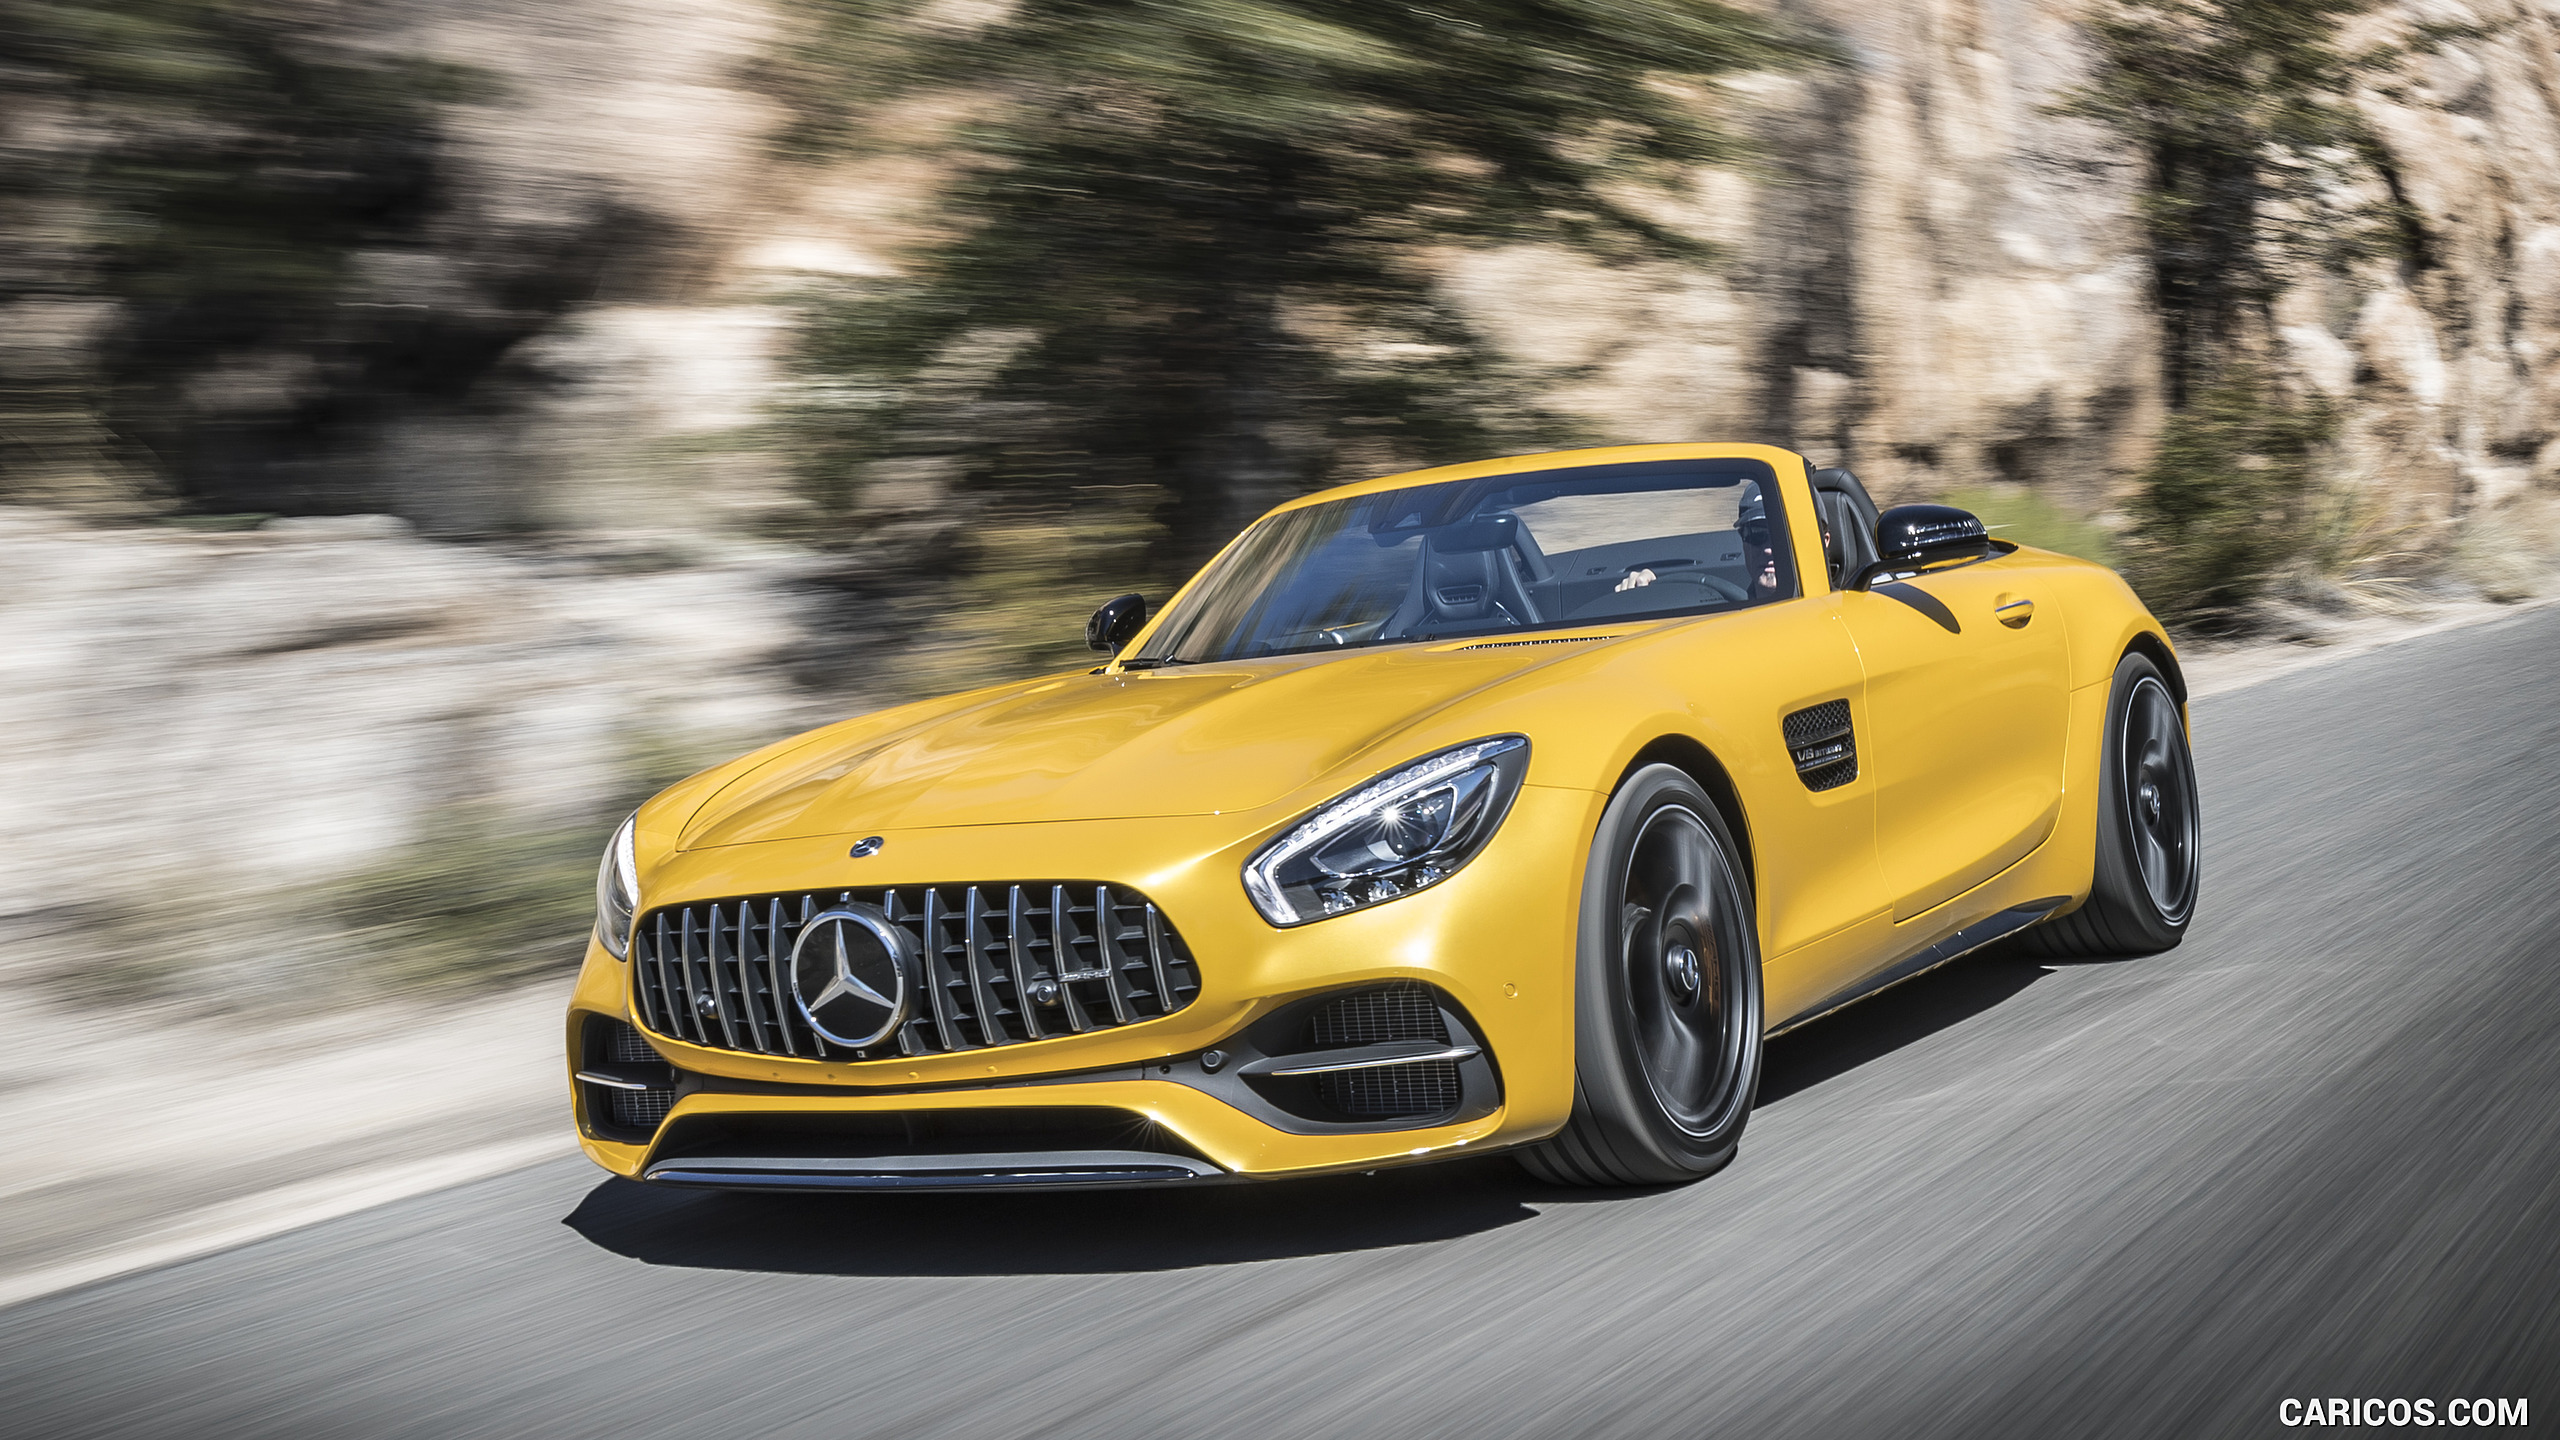 2018 Mercedes-AMG GT C Roadster - Front Three-Quarter, #185 of 350